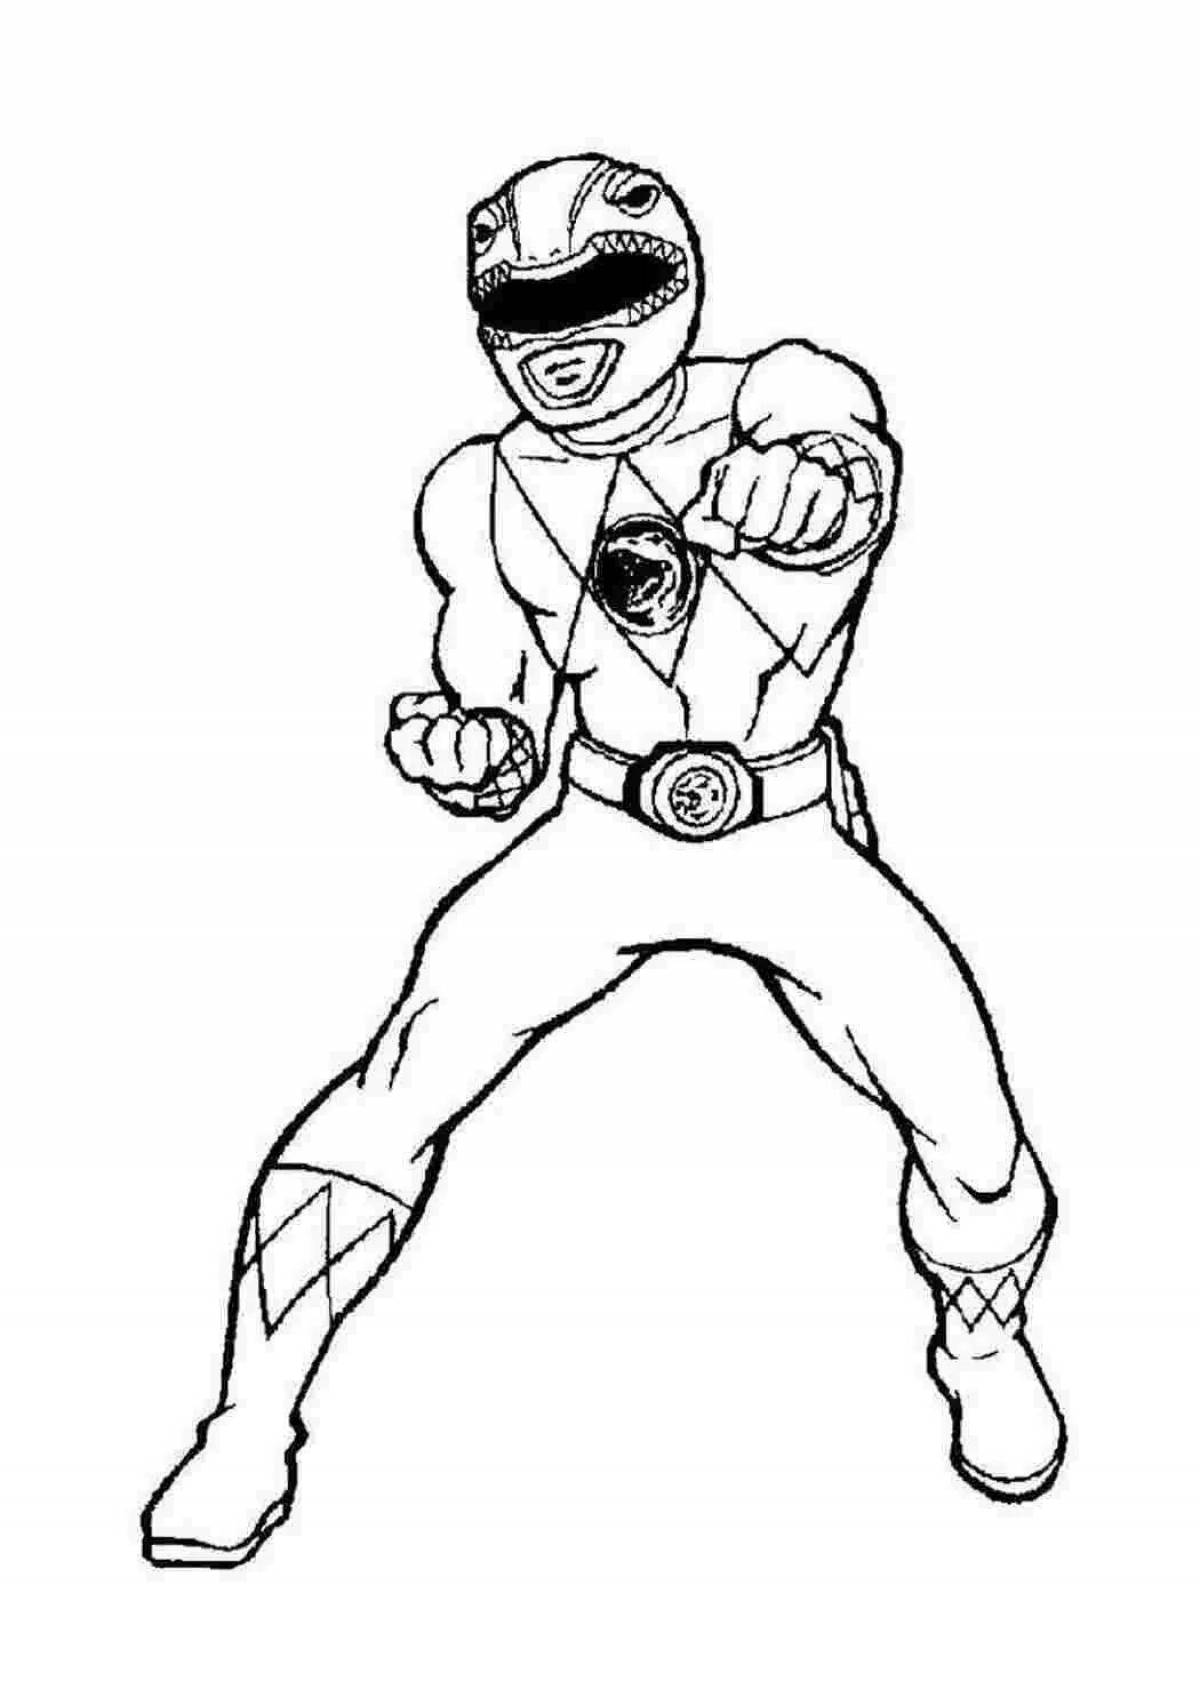 Coloring pages superheroes for boys 5 years old